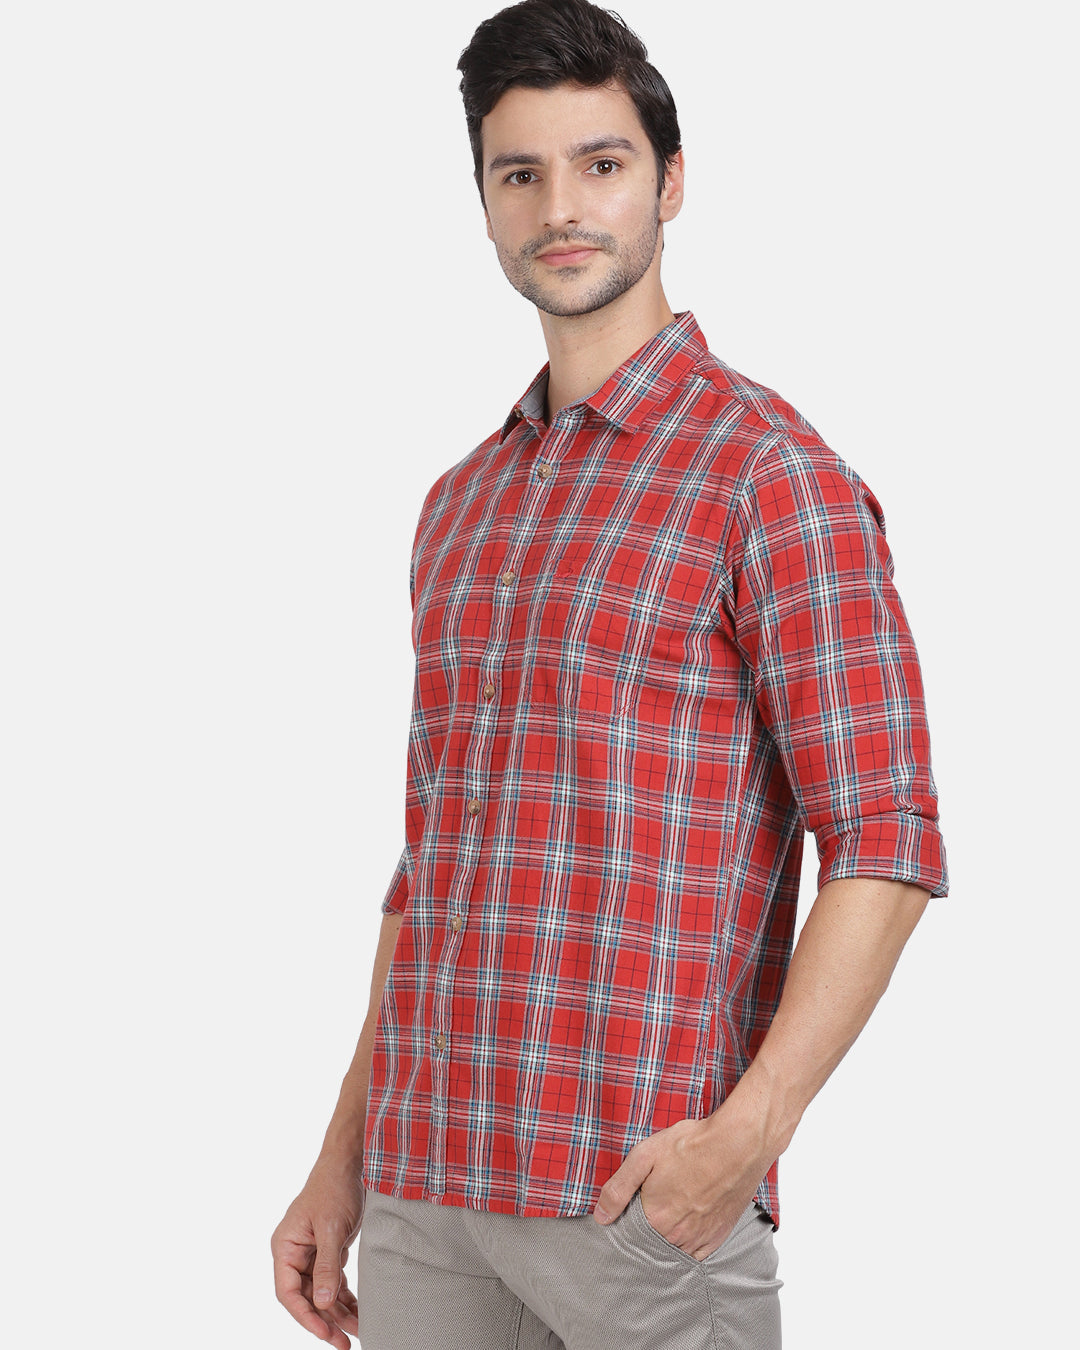 Casual Full Sleeve Slim Fit Checks Red with Collar Shirt for Men